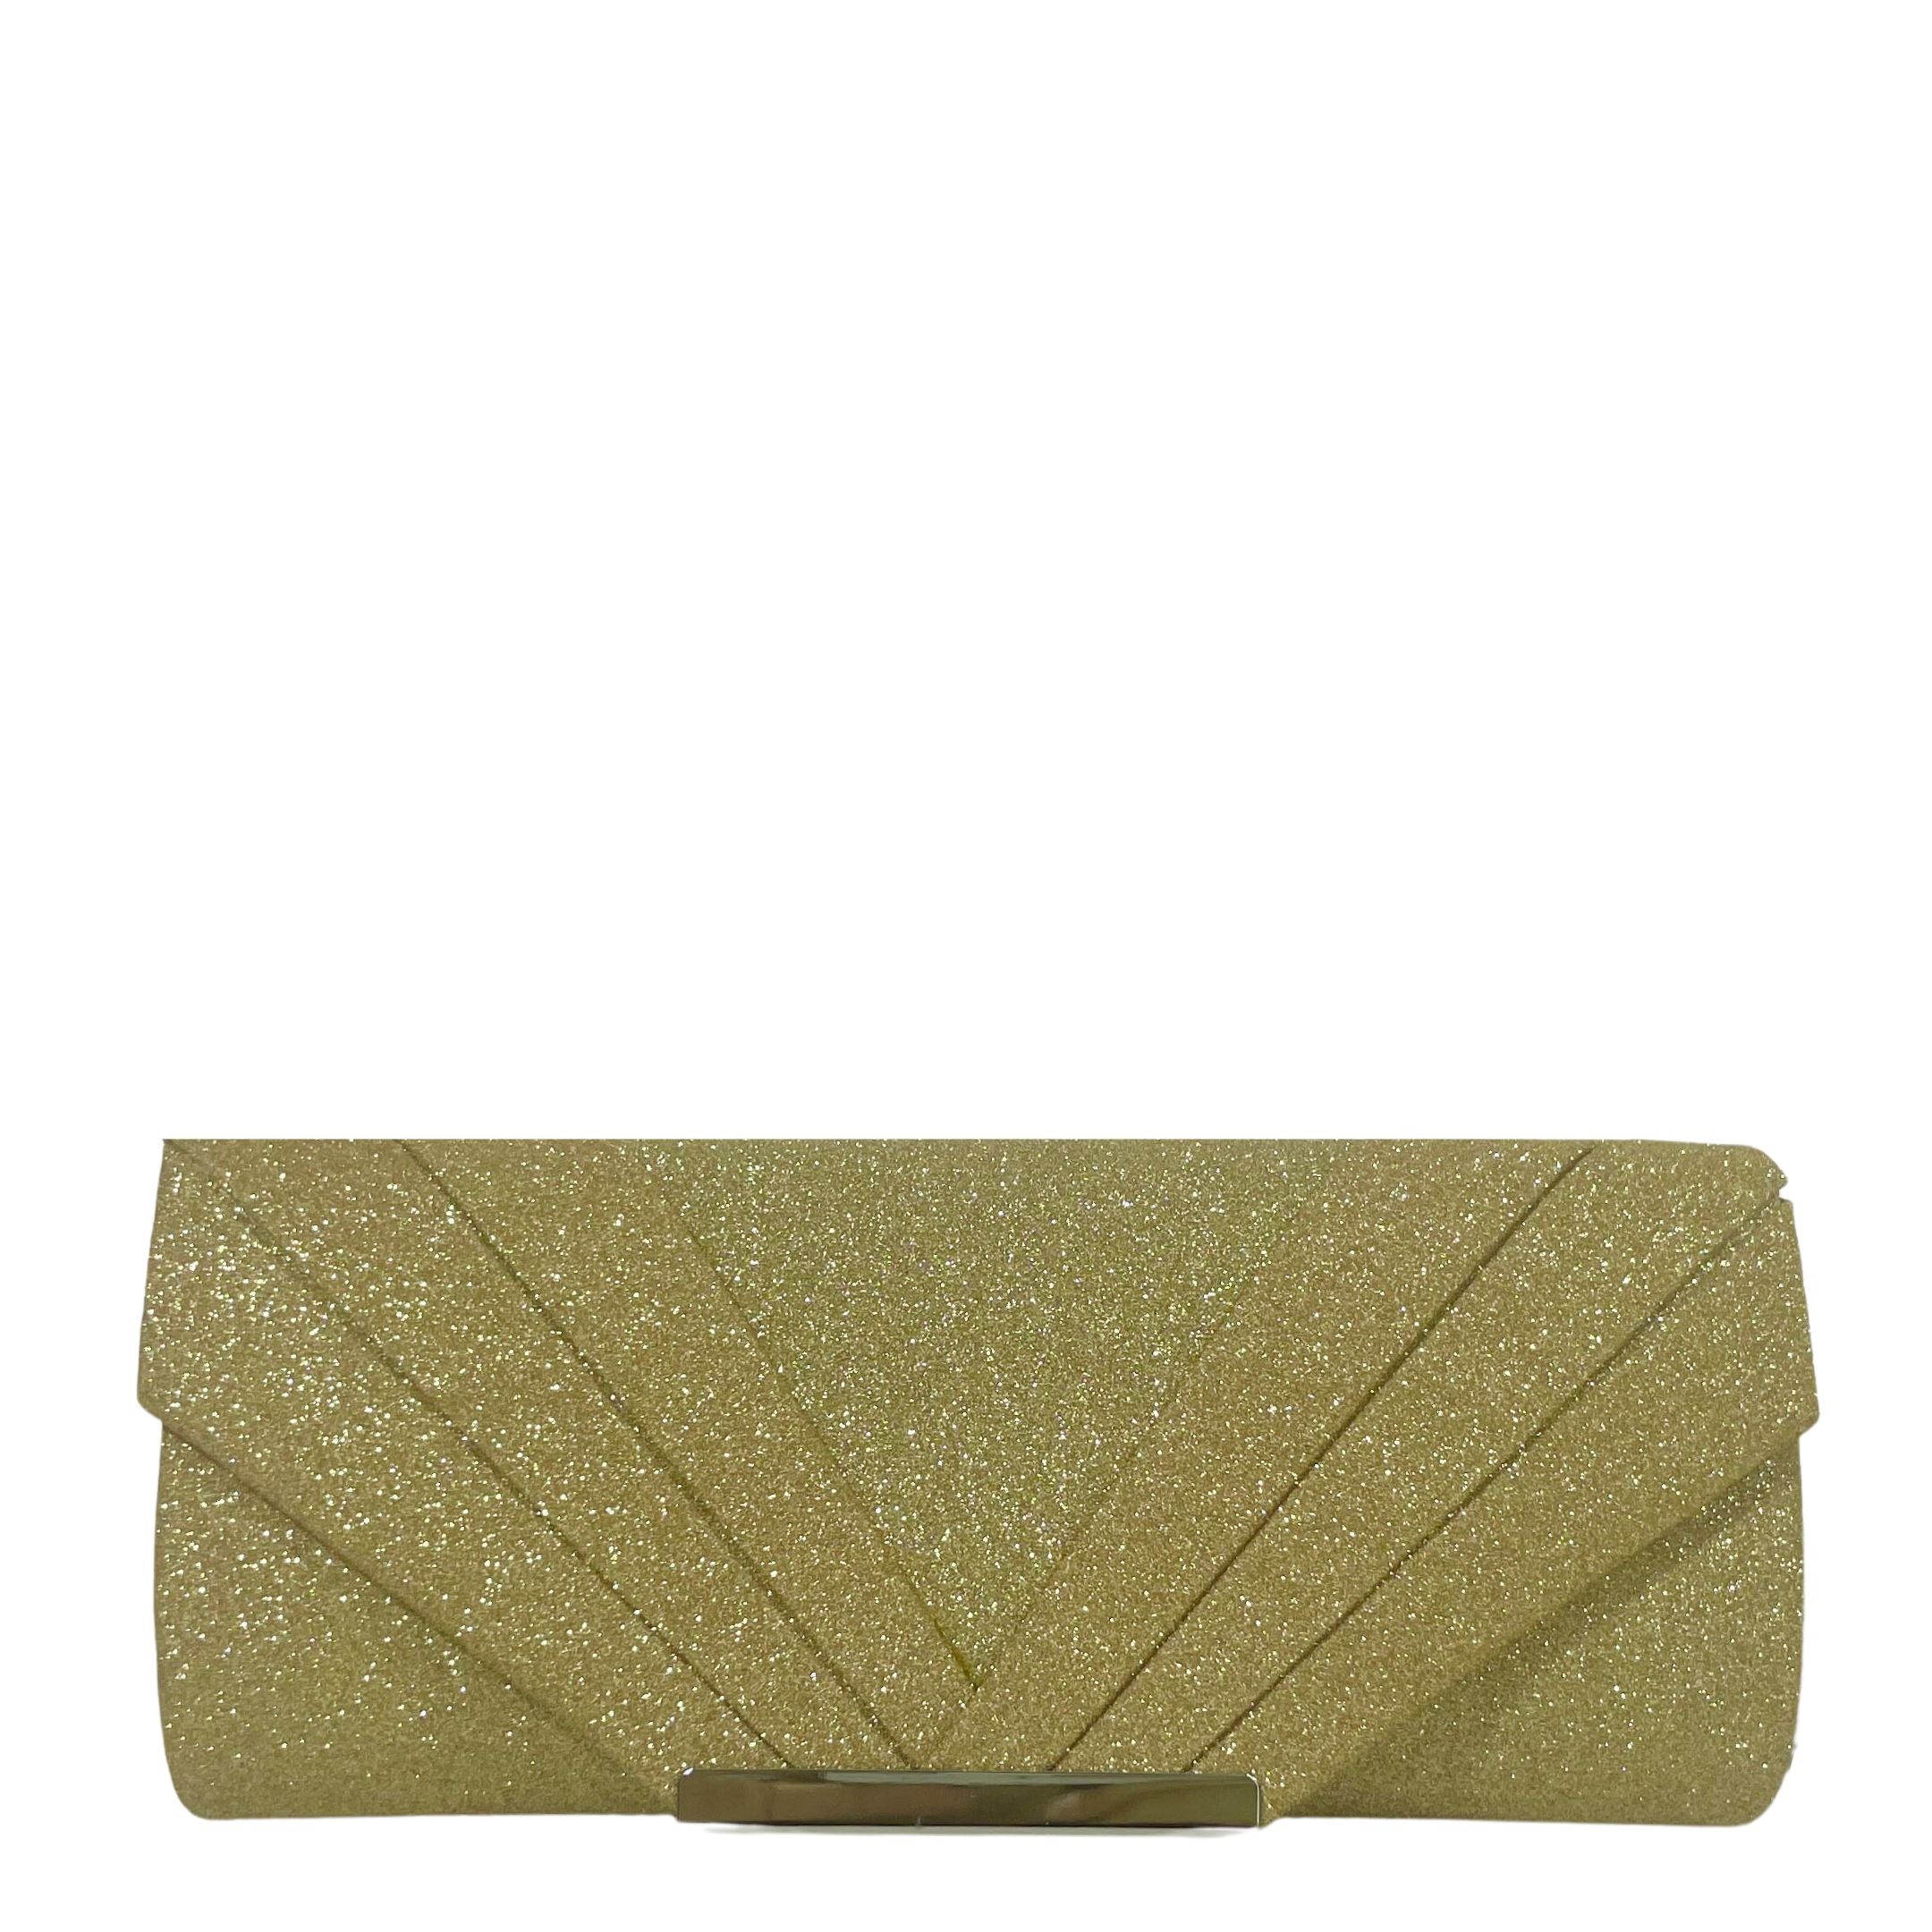 Celine Pleated Clutch